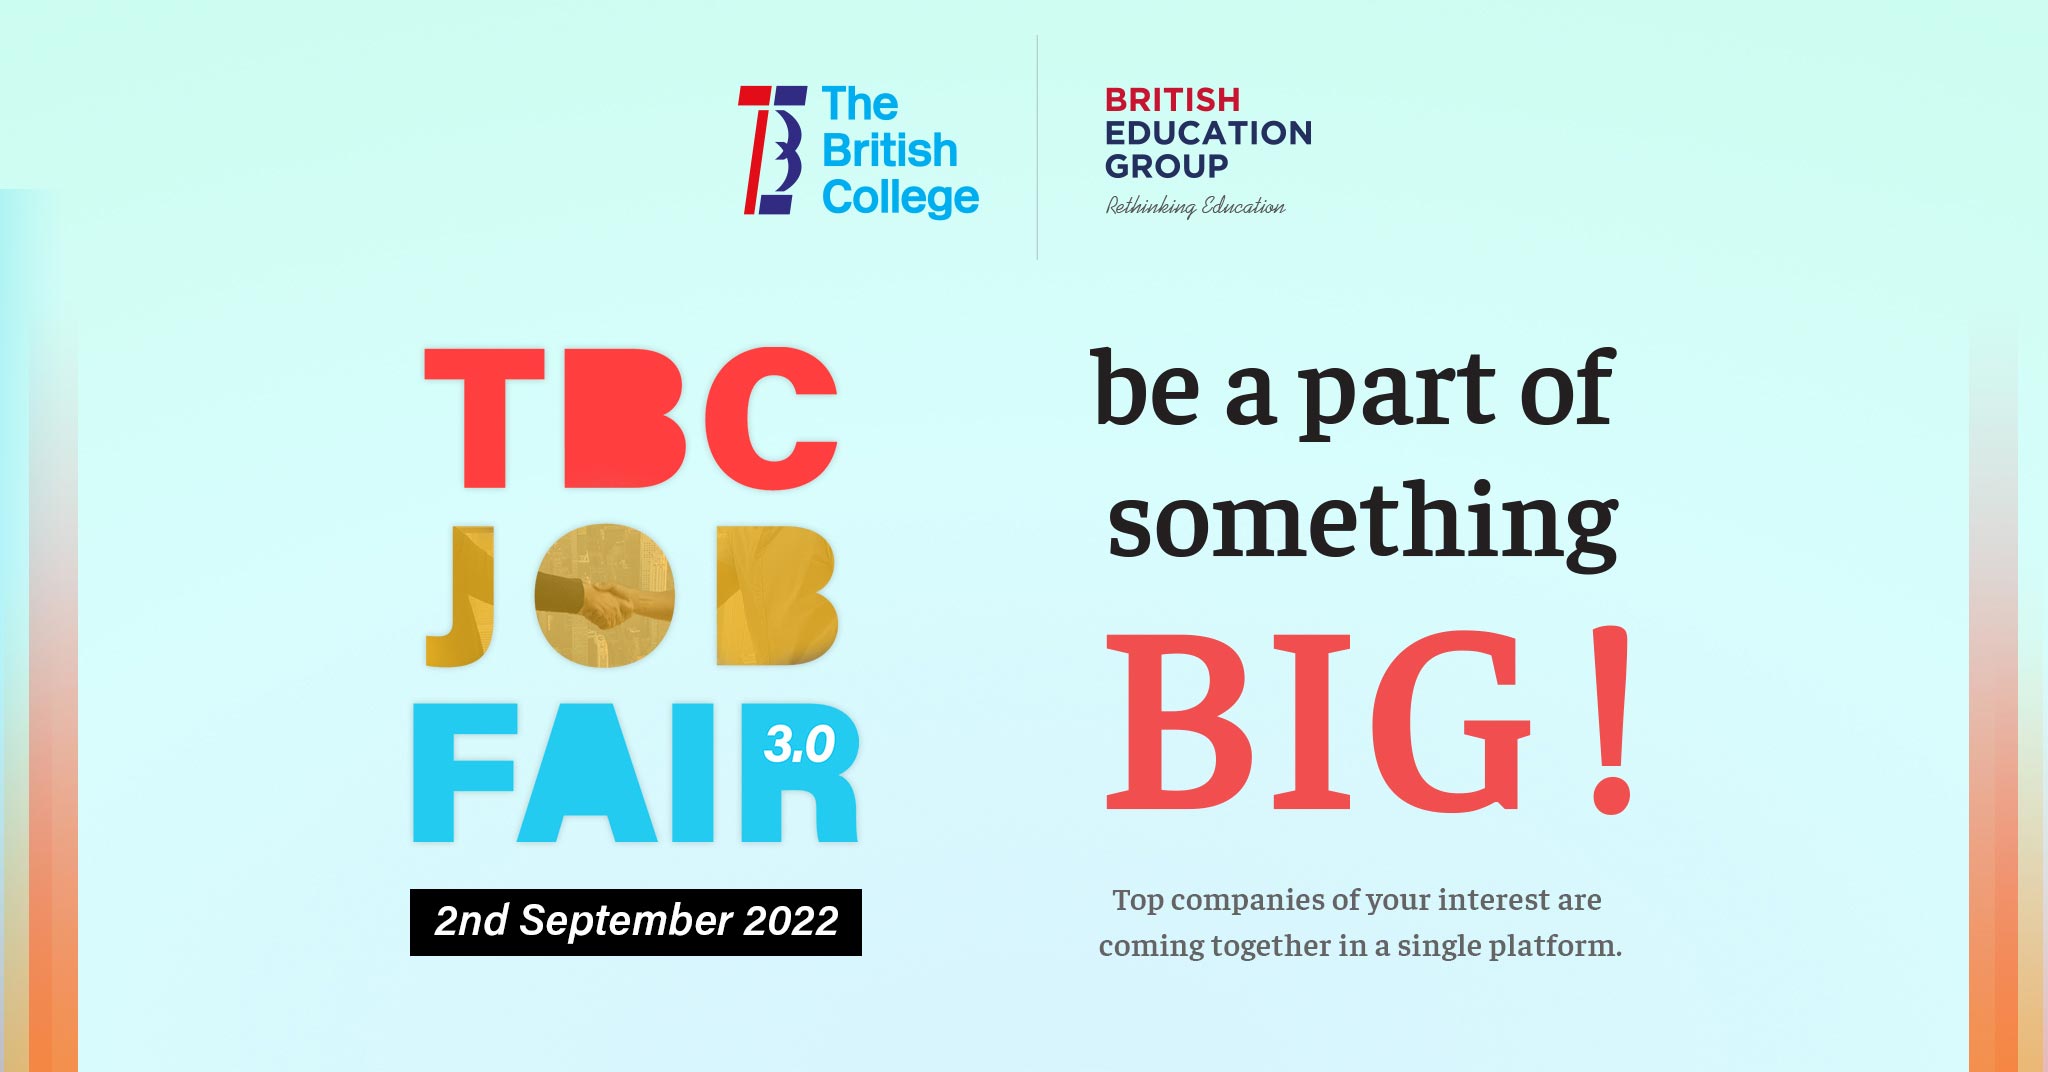 The British College is Hosting Its Annual Job Fair 3